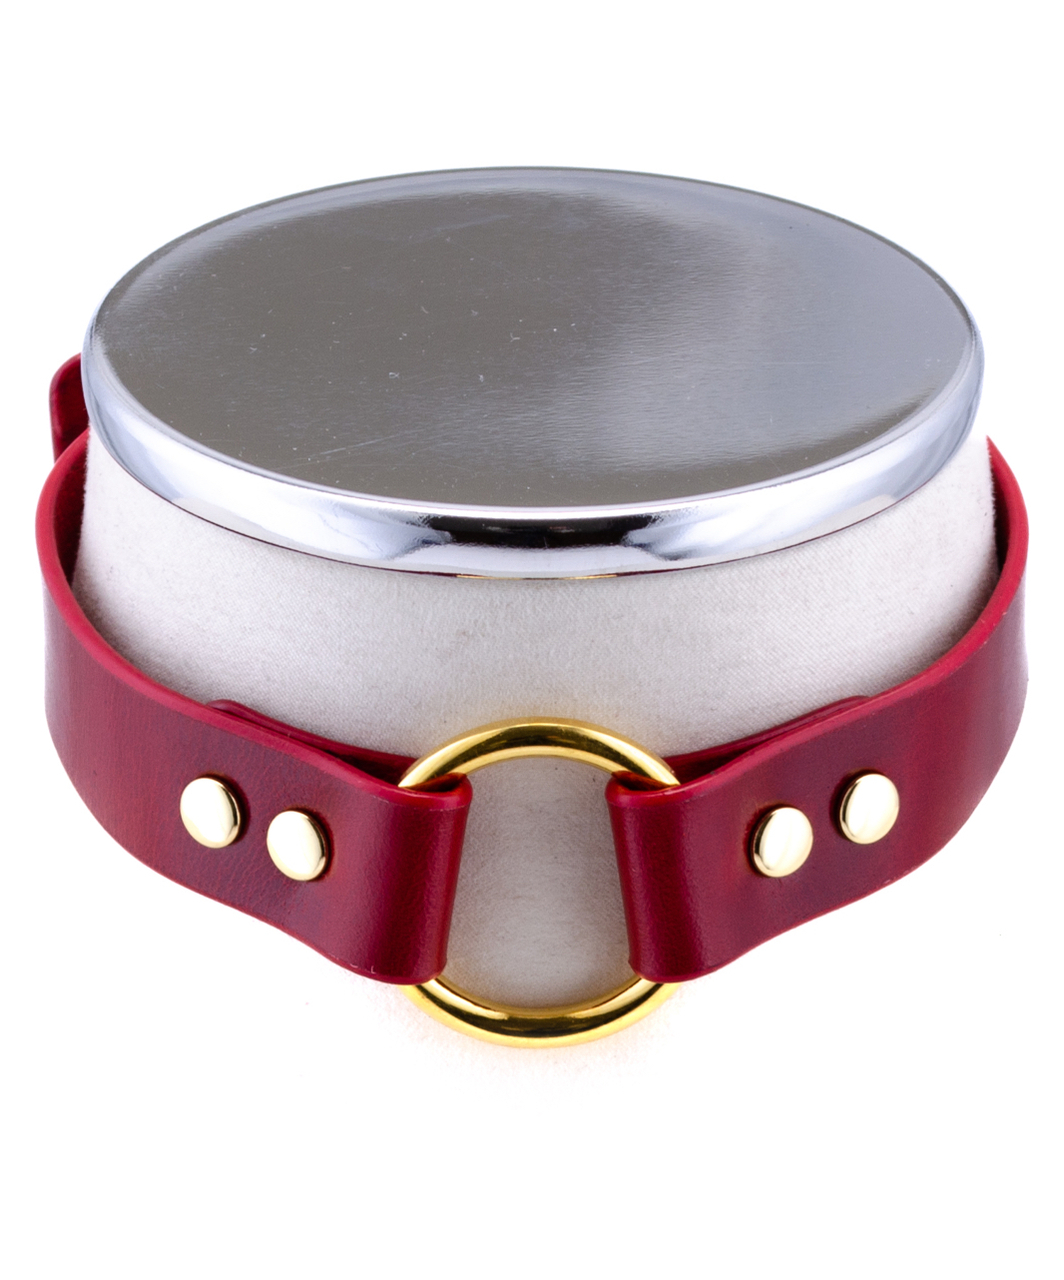 HEL Milano Mia red leather collar with gold coloured ring